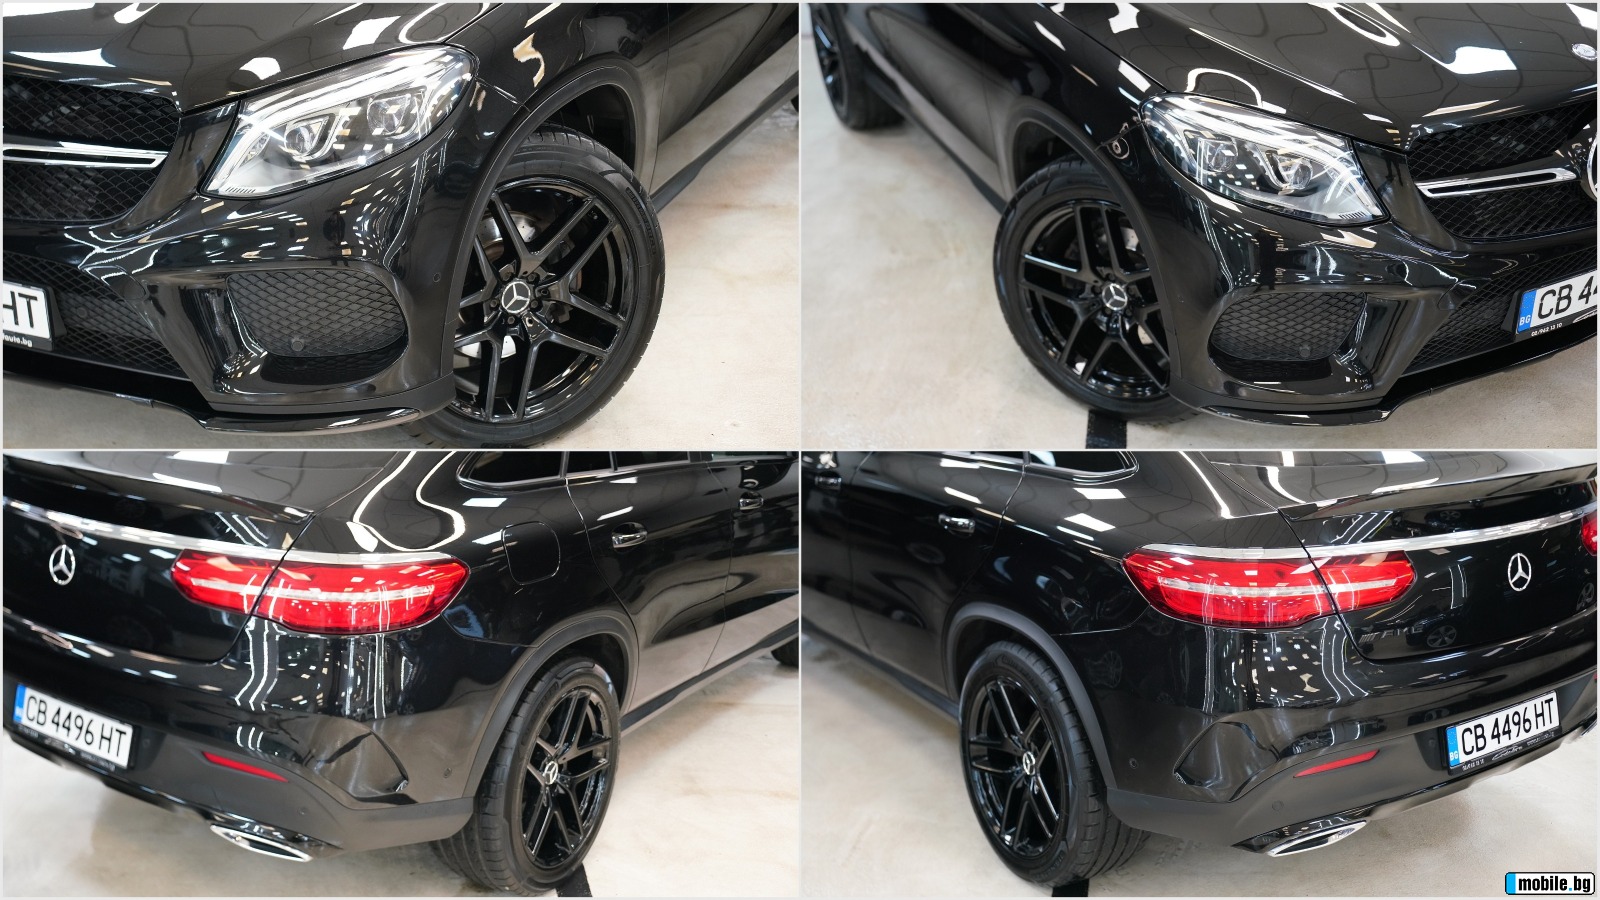 Mercedes-Benz GLE Coupe 350d 4Matic AMG Line | Mobile.bg   8